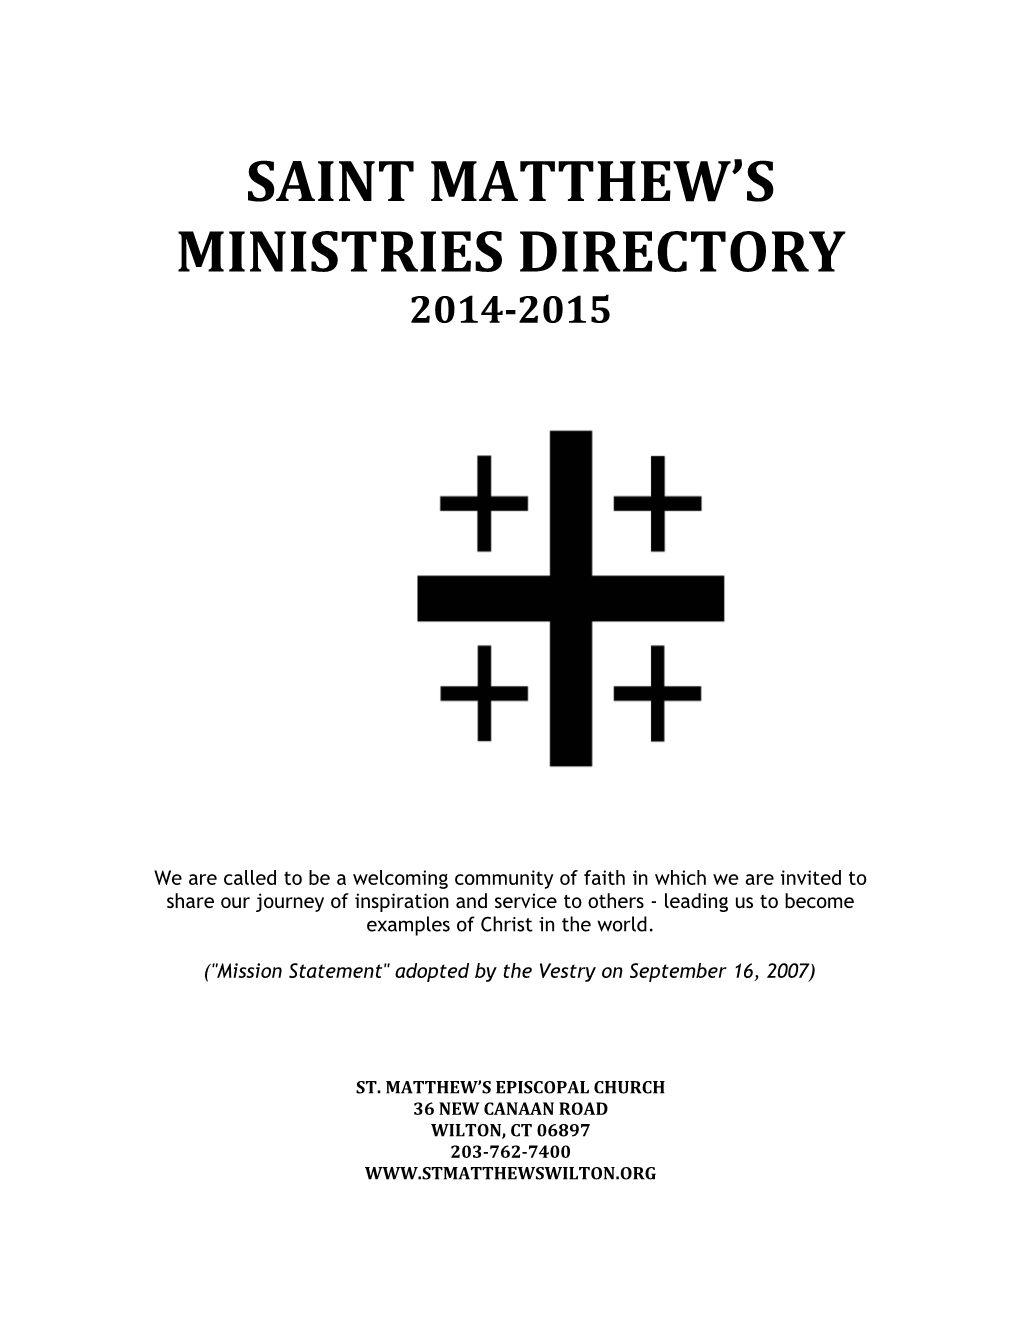 Ministries Directory